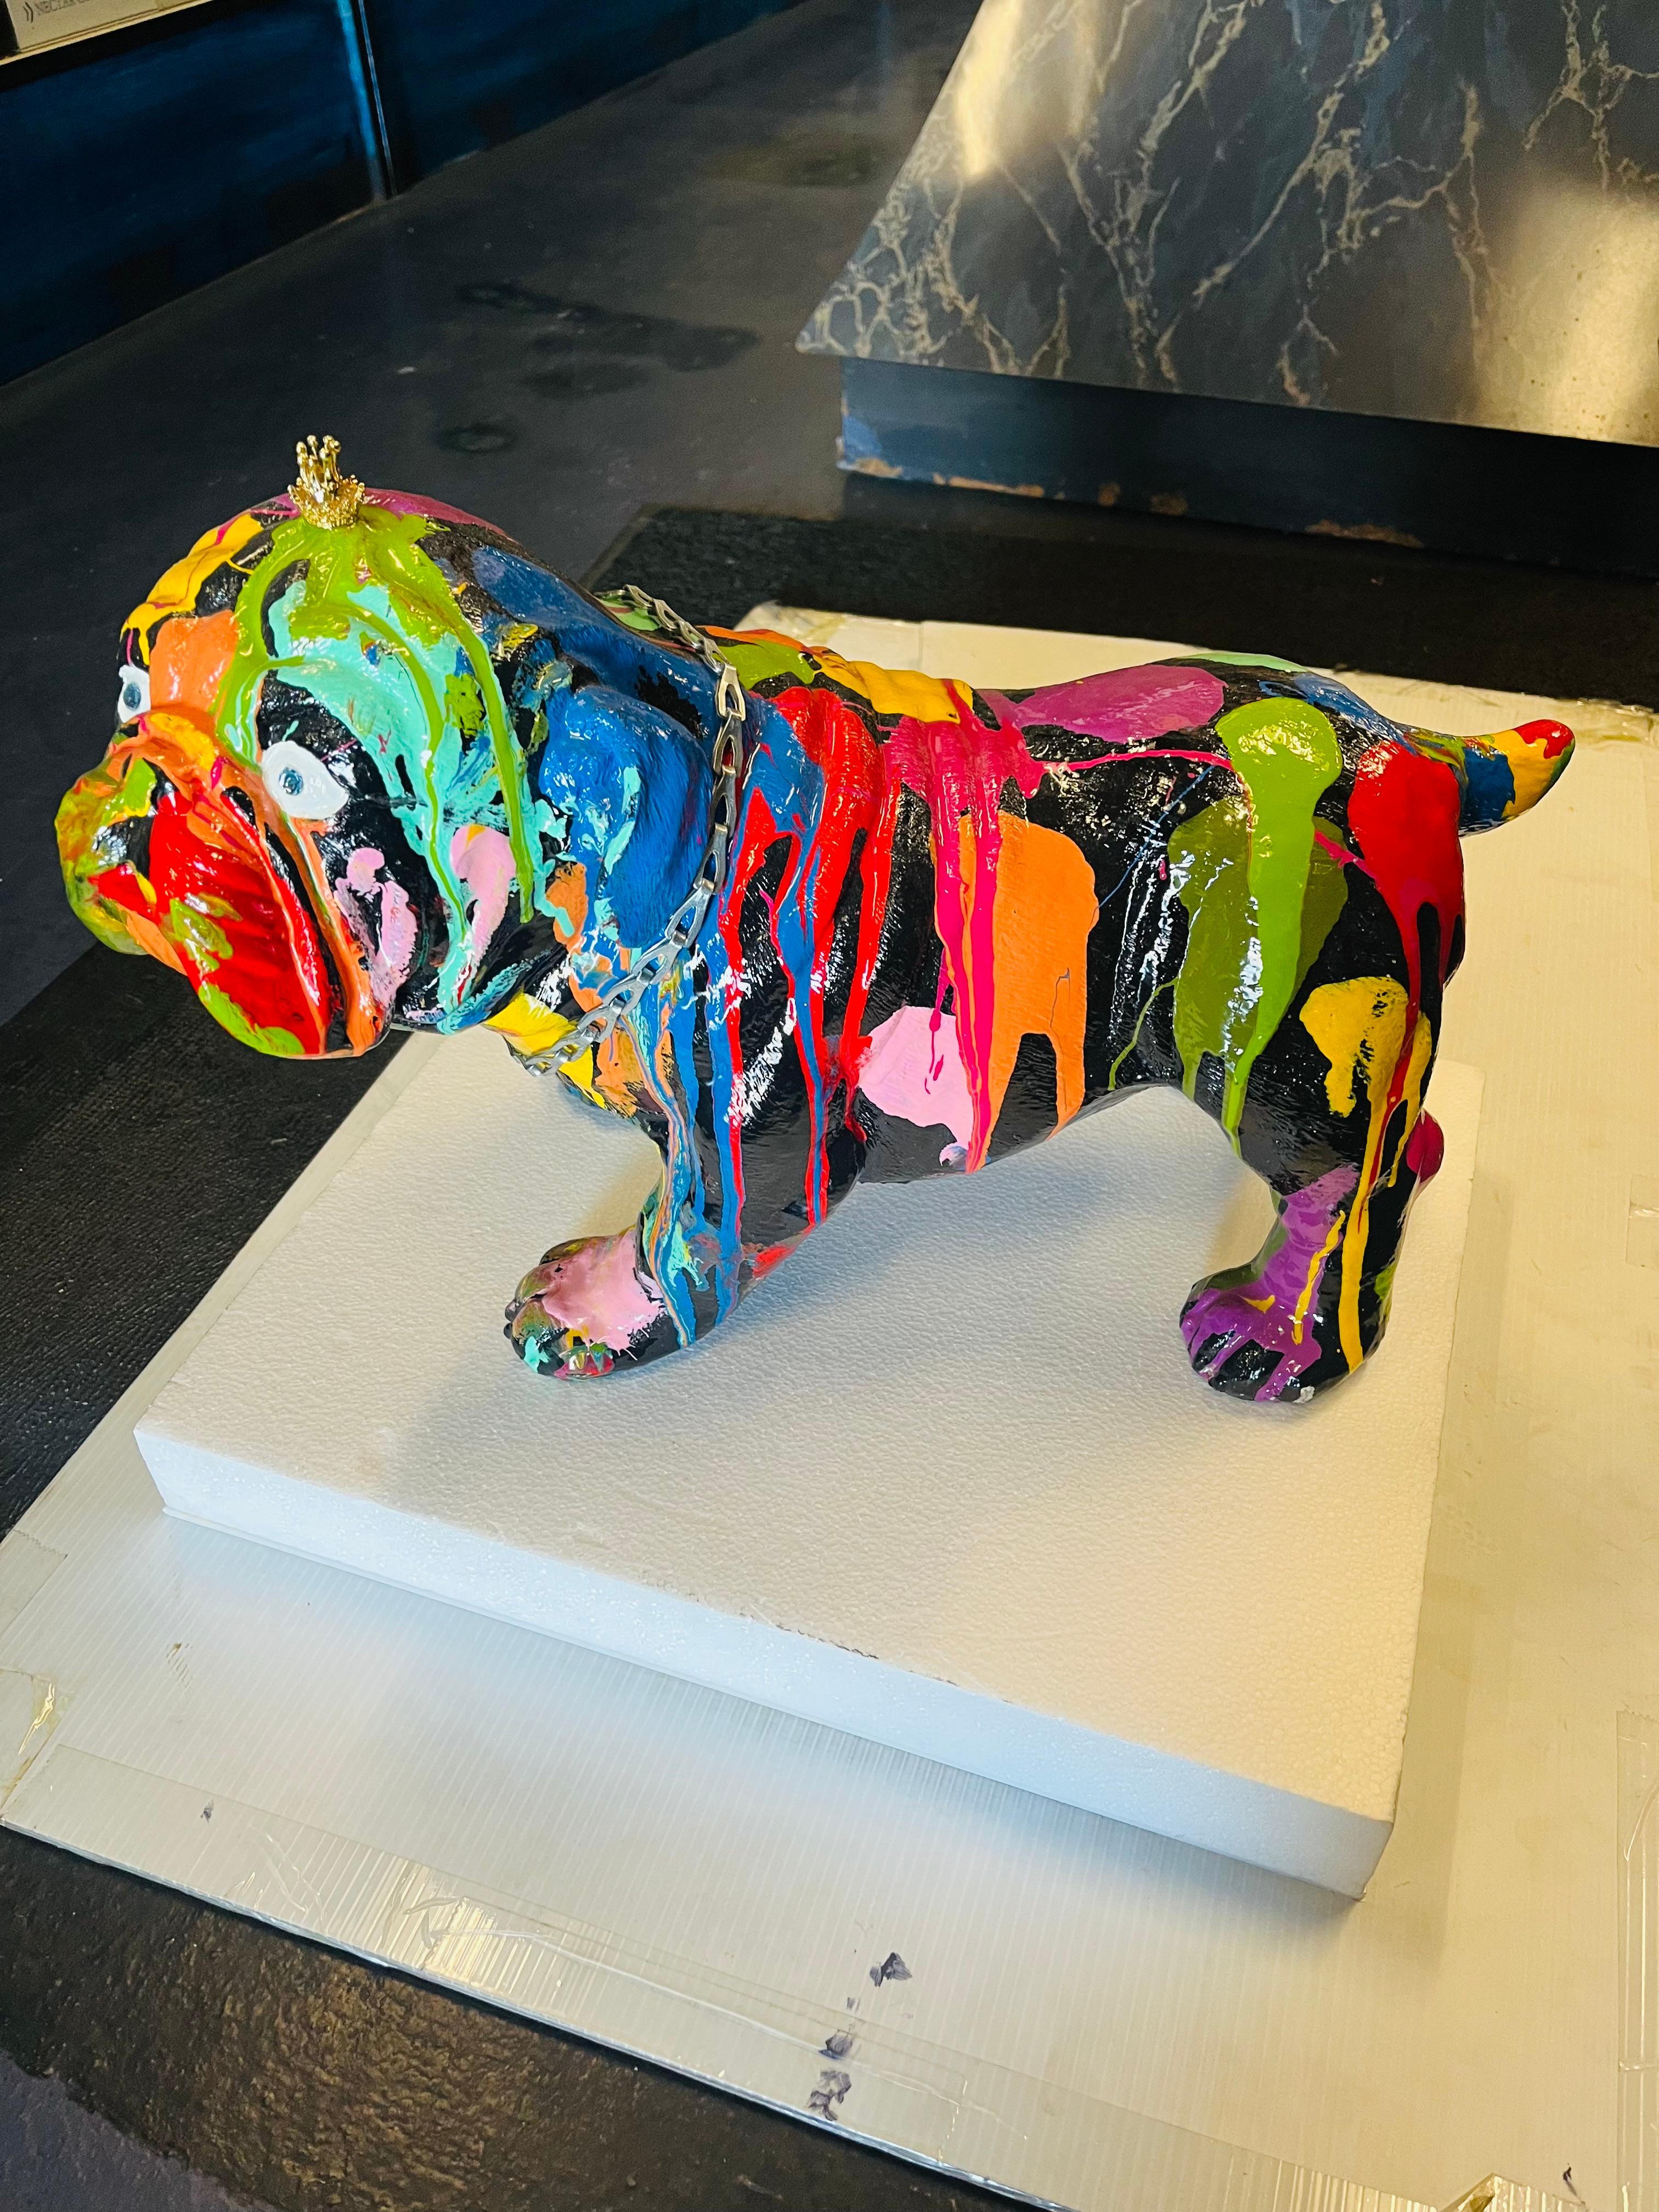 *LIMITED TIME SUPER SALE UNTIL MAY 31ST - TAKE ADVANTAGE OF IT*

Pop Puppies is an exclusive series of Artist Mauro Oliveira. This exclusive English Bulldog is Oliveira's own cast and design, that means you will only find it here. Made of plaster